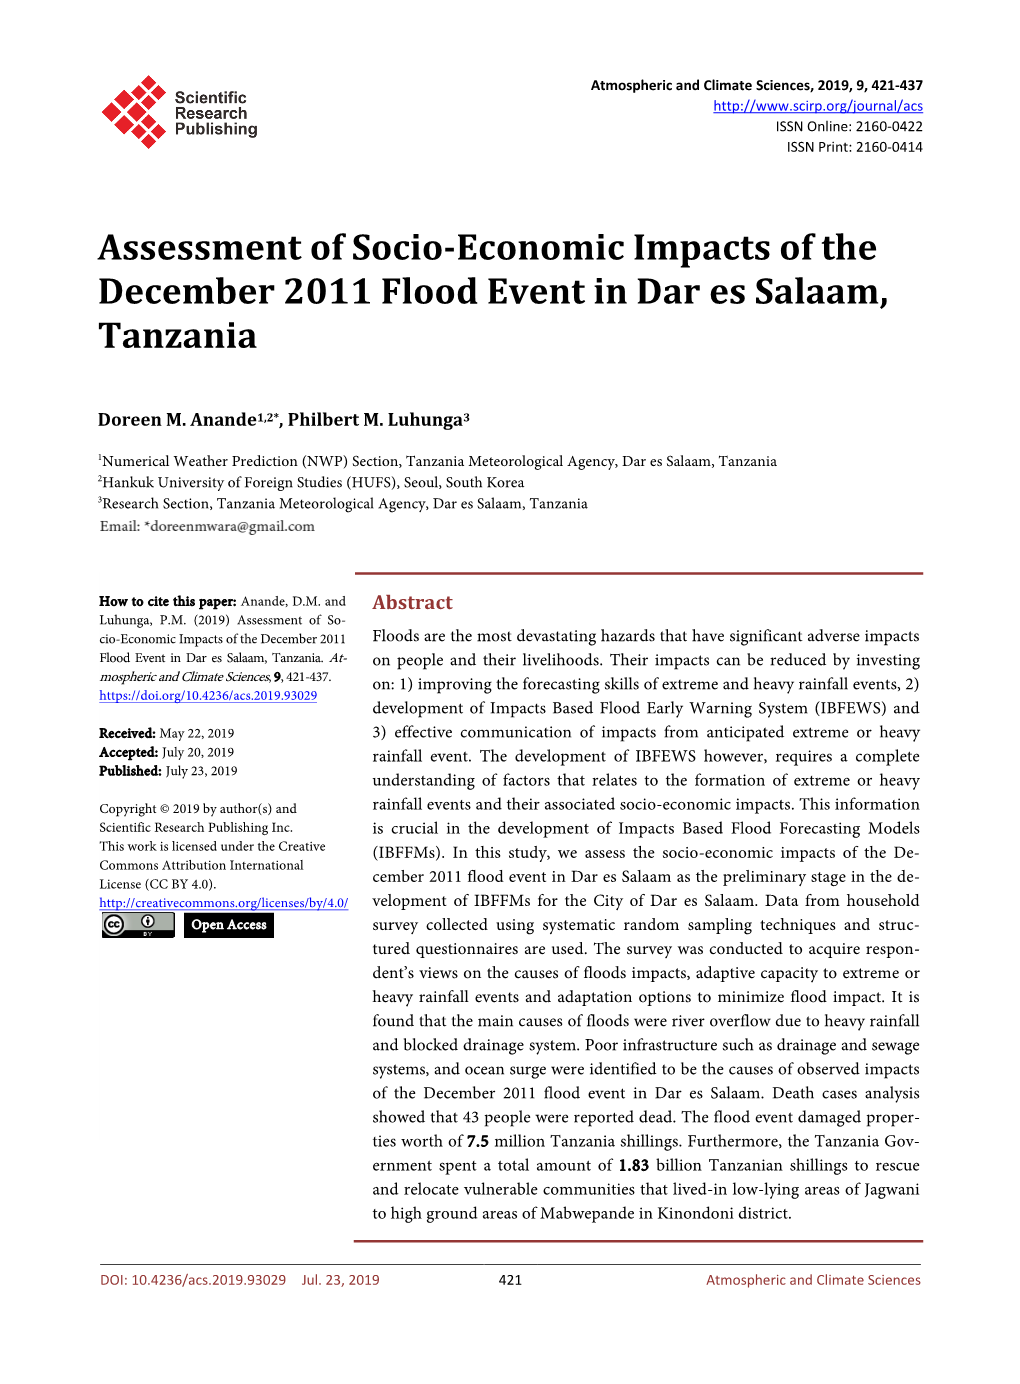 Assessment of Socio-Economic Impacts of the December 2011 Flood Event in Dar Es Salaam, Tanzania